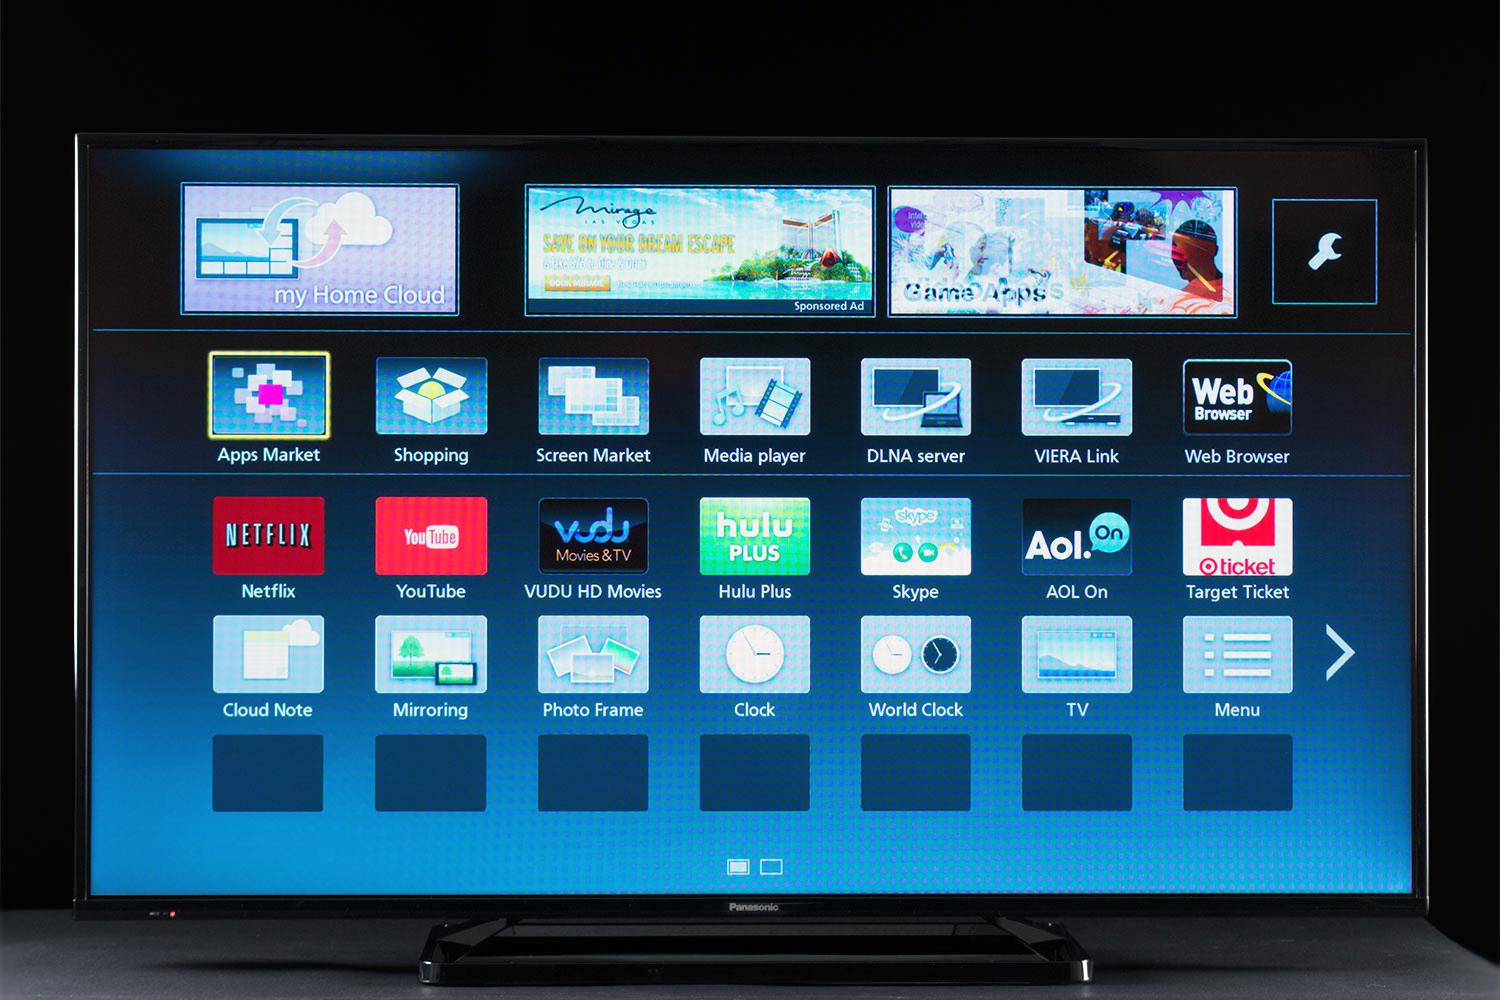 How to Add Apps to Panasonic Smart TV